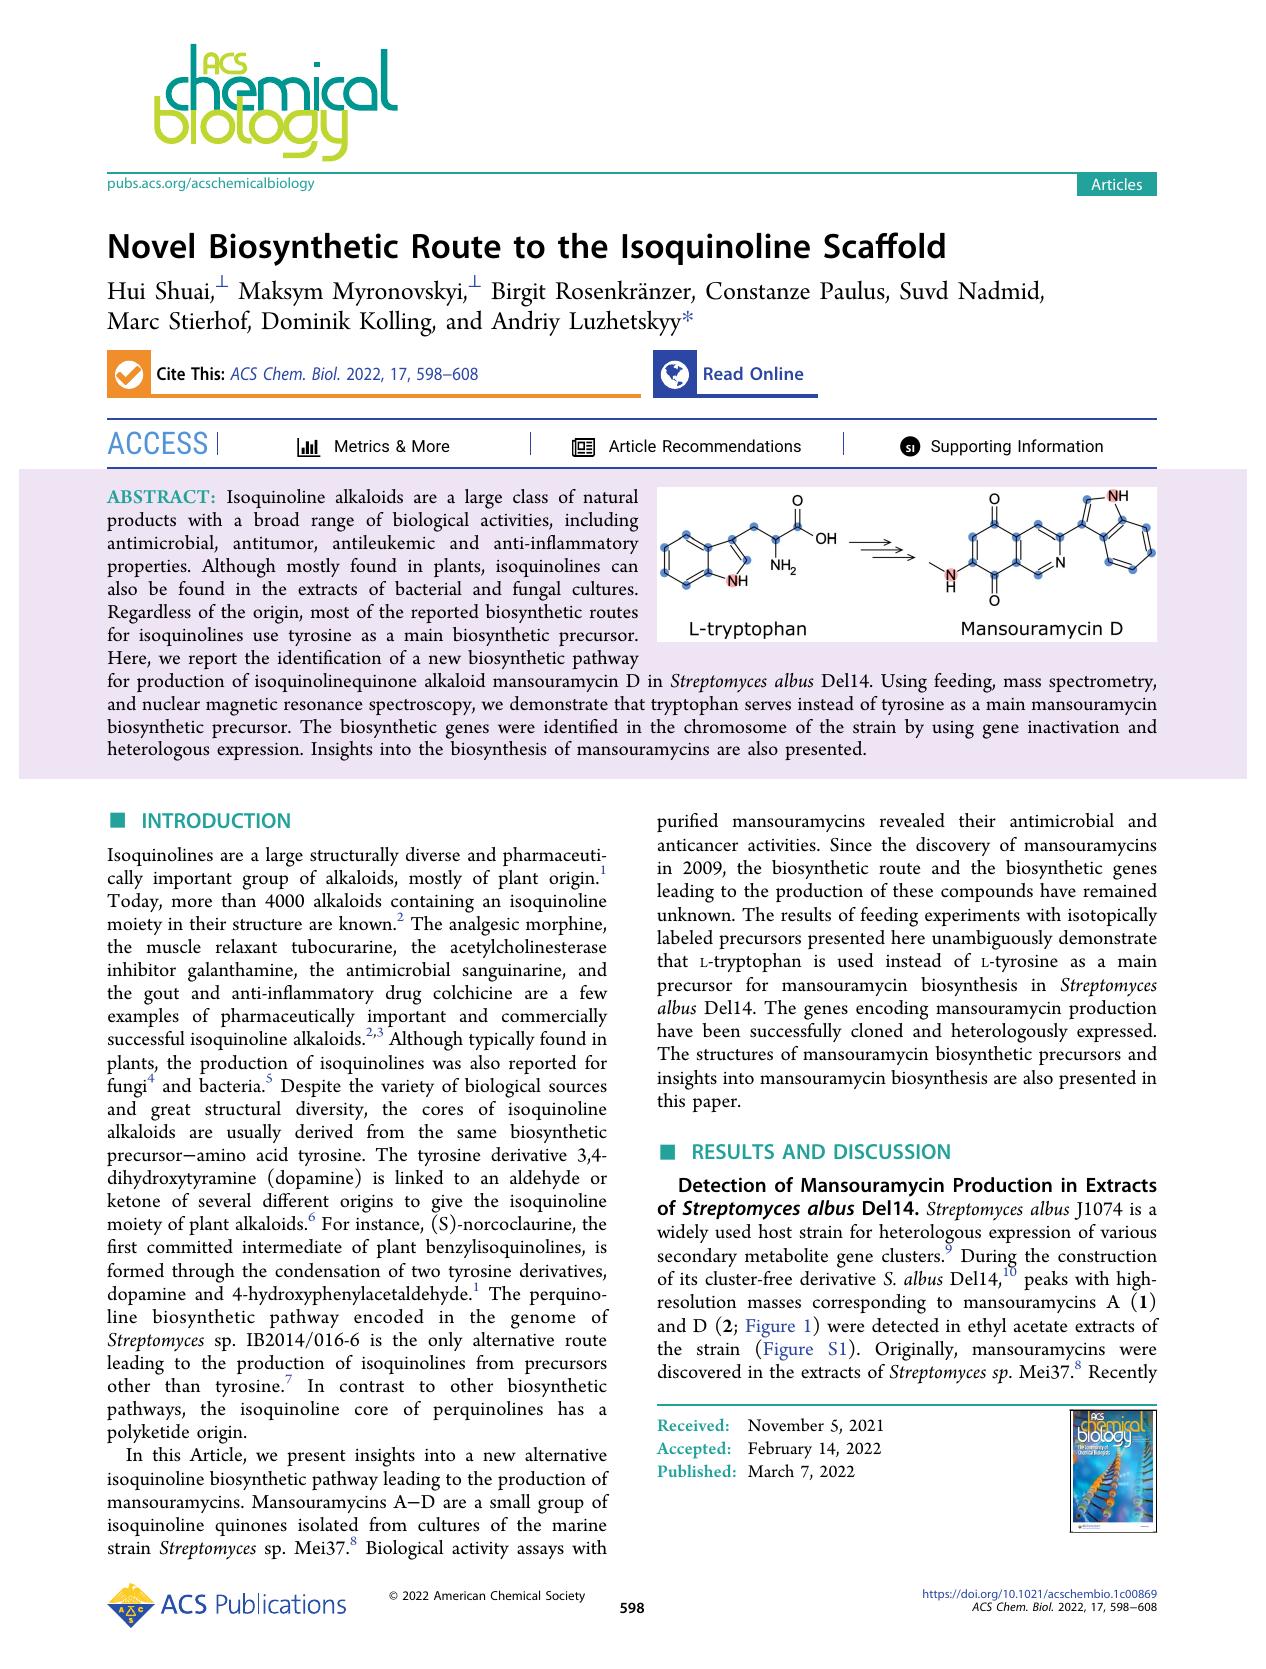 Novel Biosynthetic Route to the Isoquinoline Scaffold by unknow